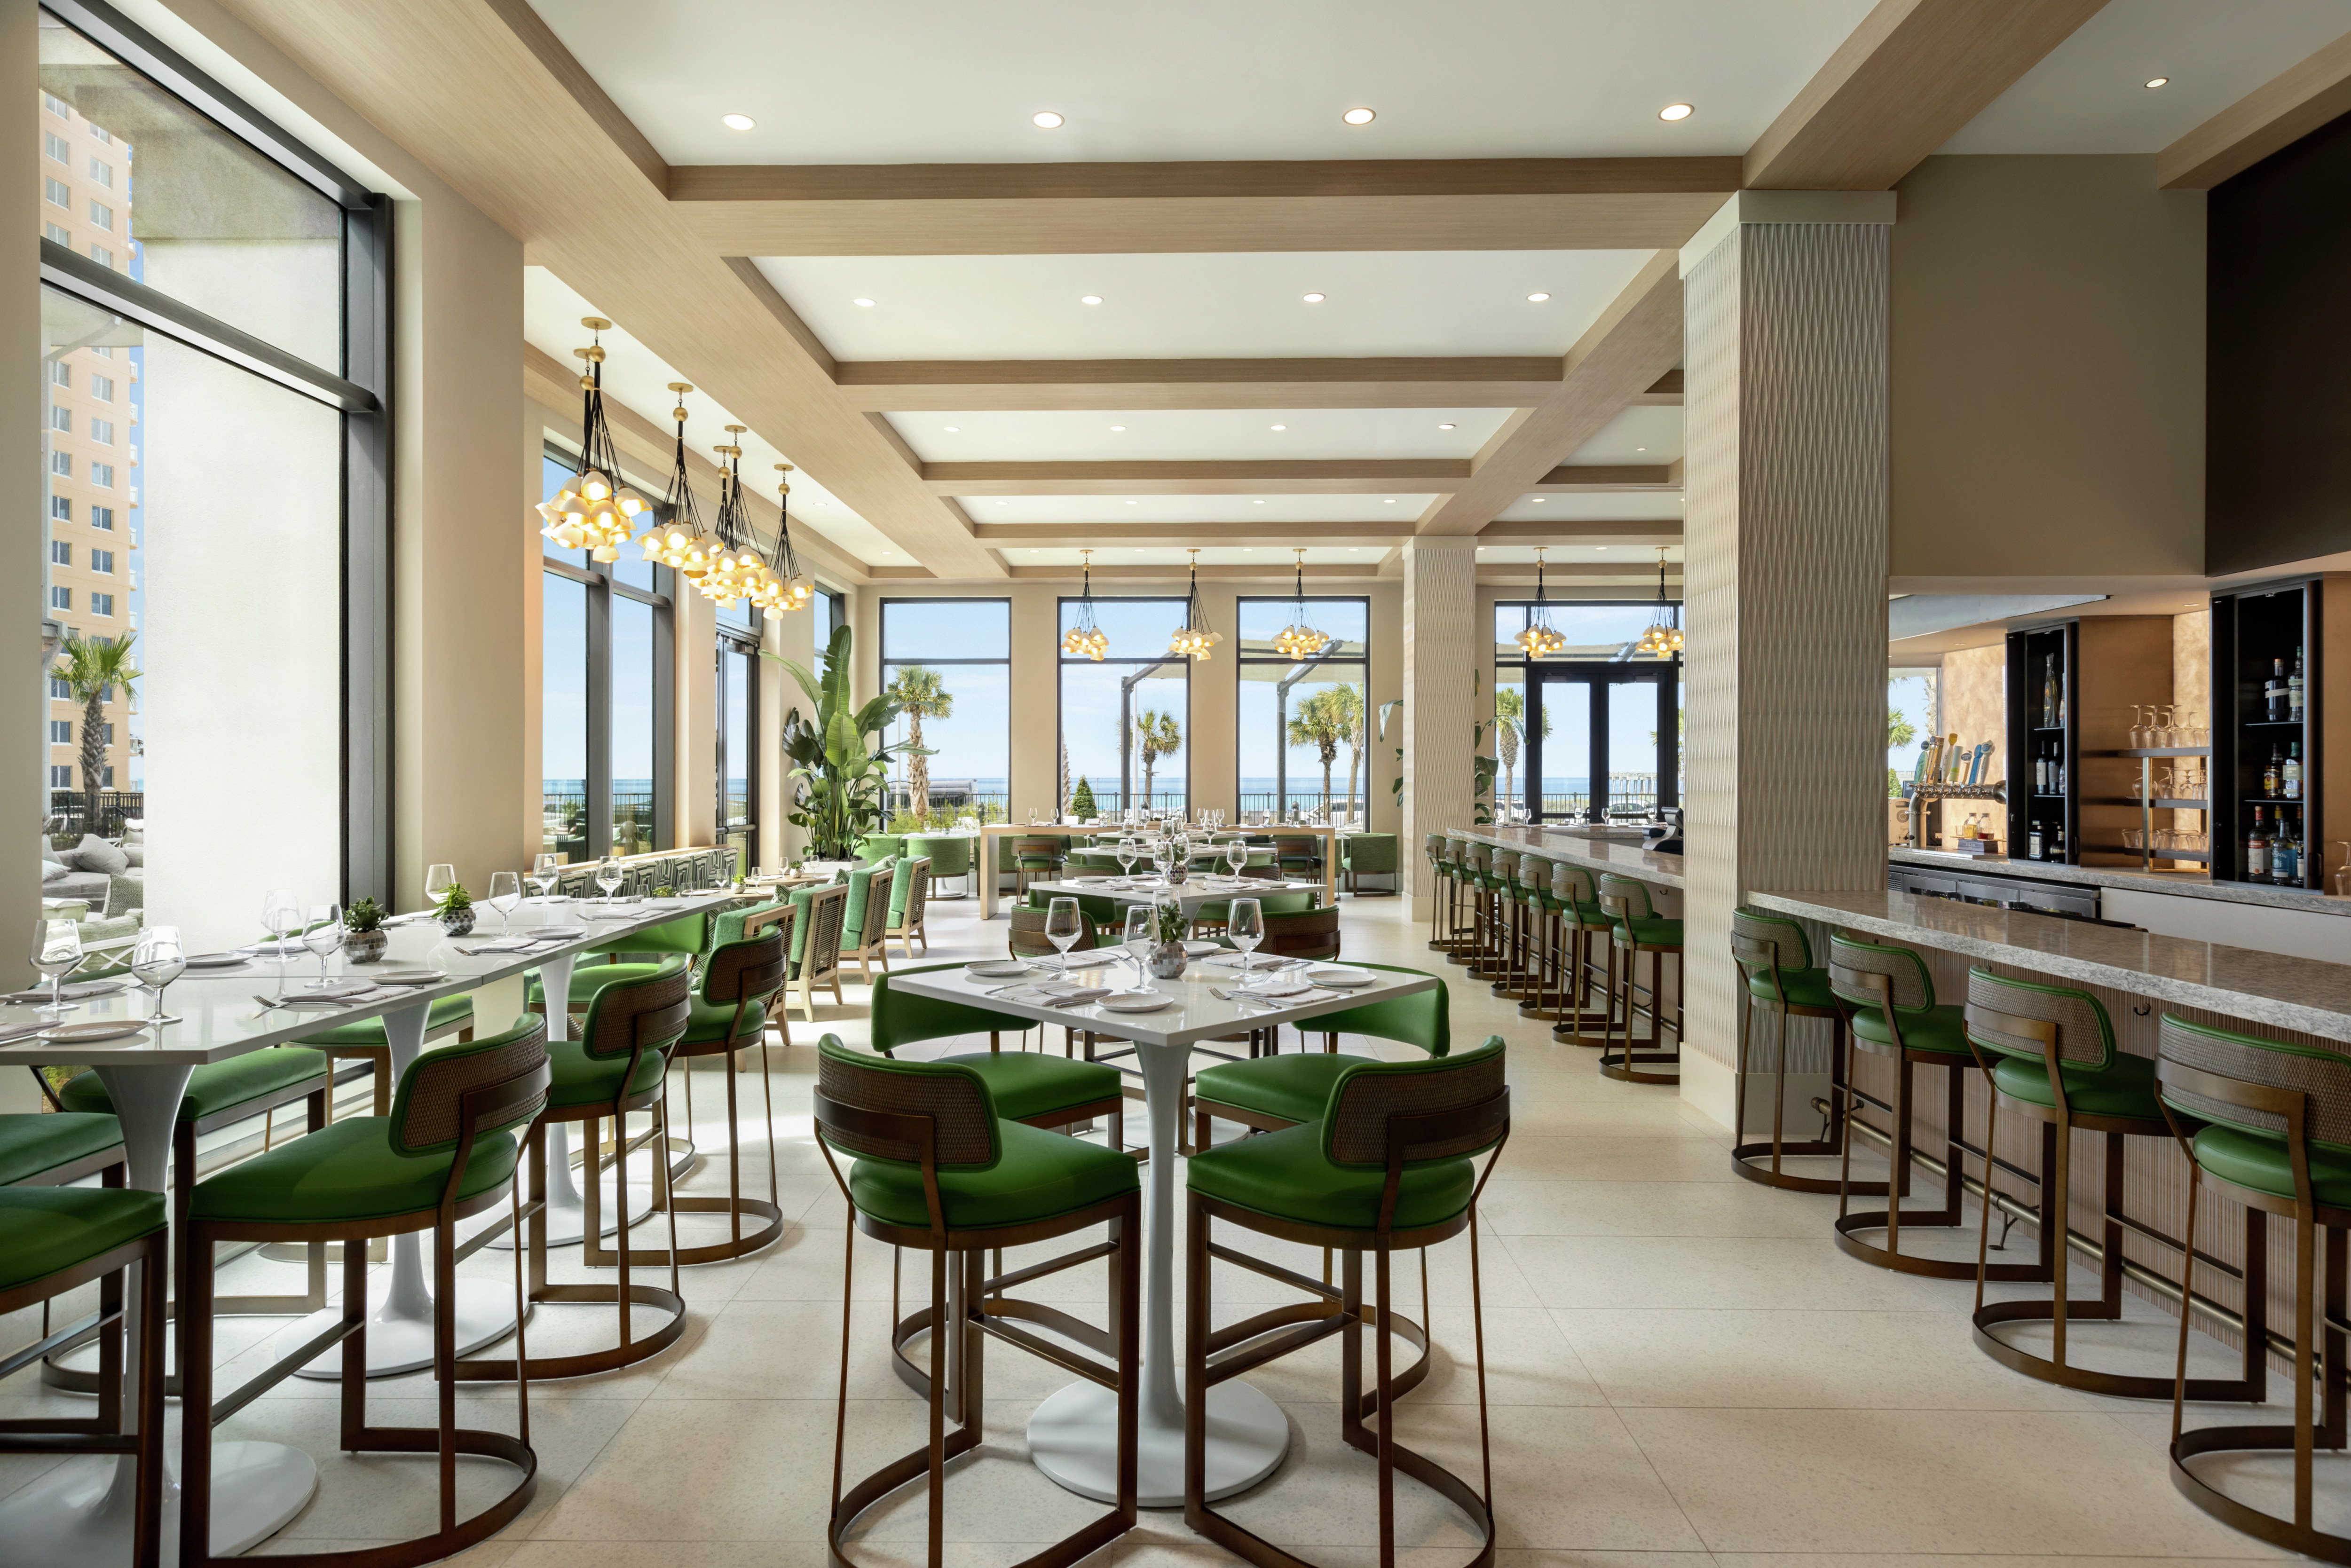 Convenient on-site bar and grill with ample seating and ocean views